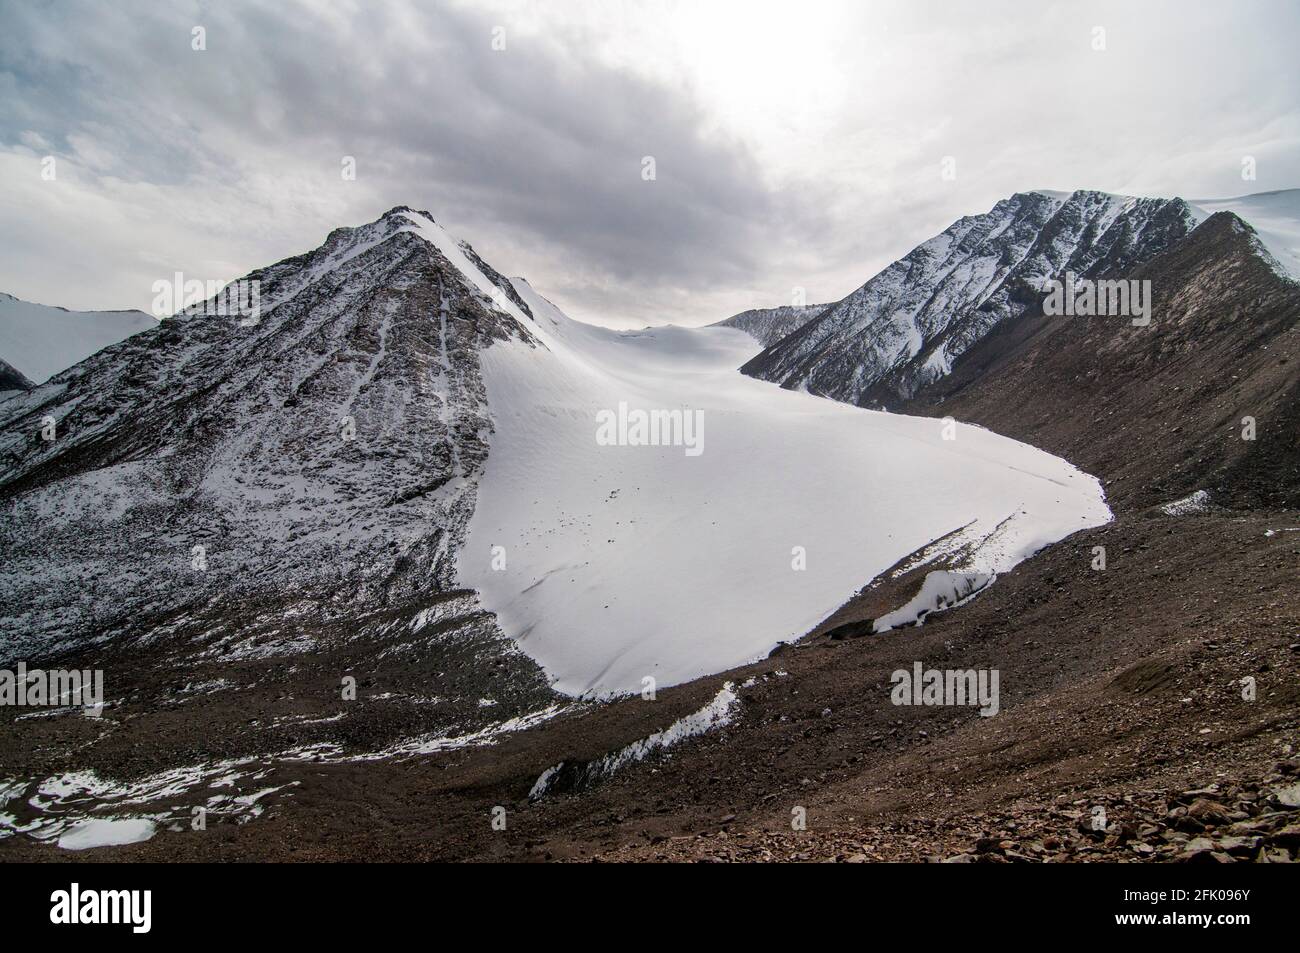 Fresh snow covers the top of the Xinjiang Tianshan No 1 Glacier, where ice and snow have been compacted over many years onto the rocky slopes of the Tianshan mountains in Eastern Xinjiang, China, PRC. © Time-Snaps Stock Photo